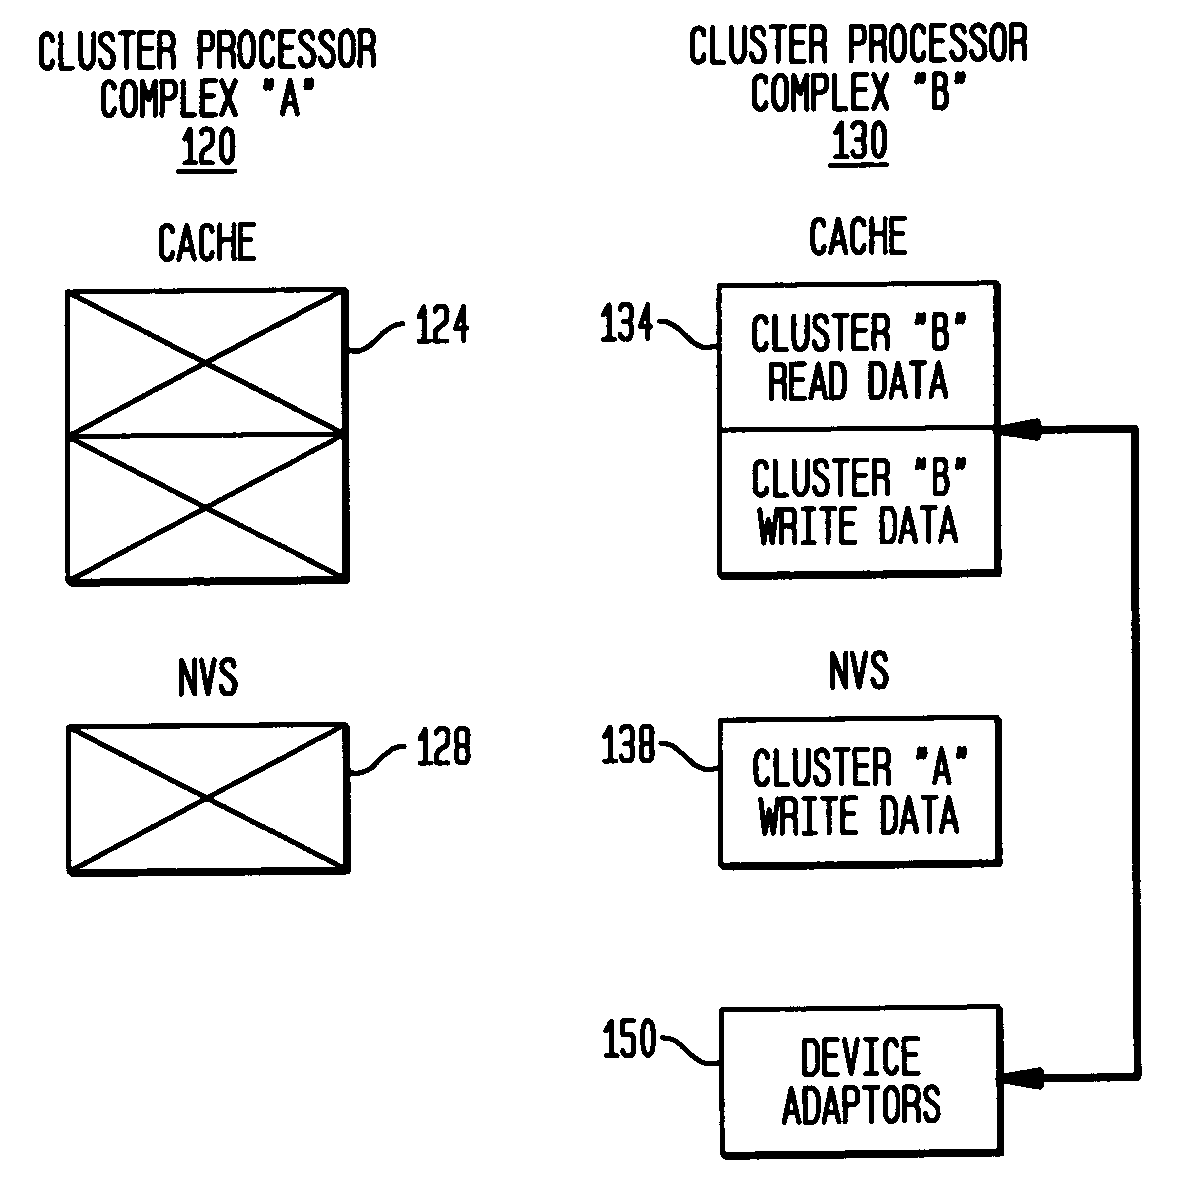 Preserving cache data against cluster reboot